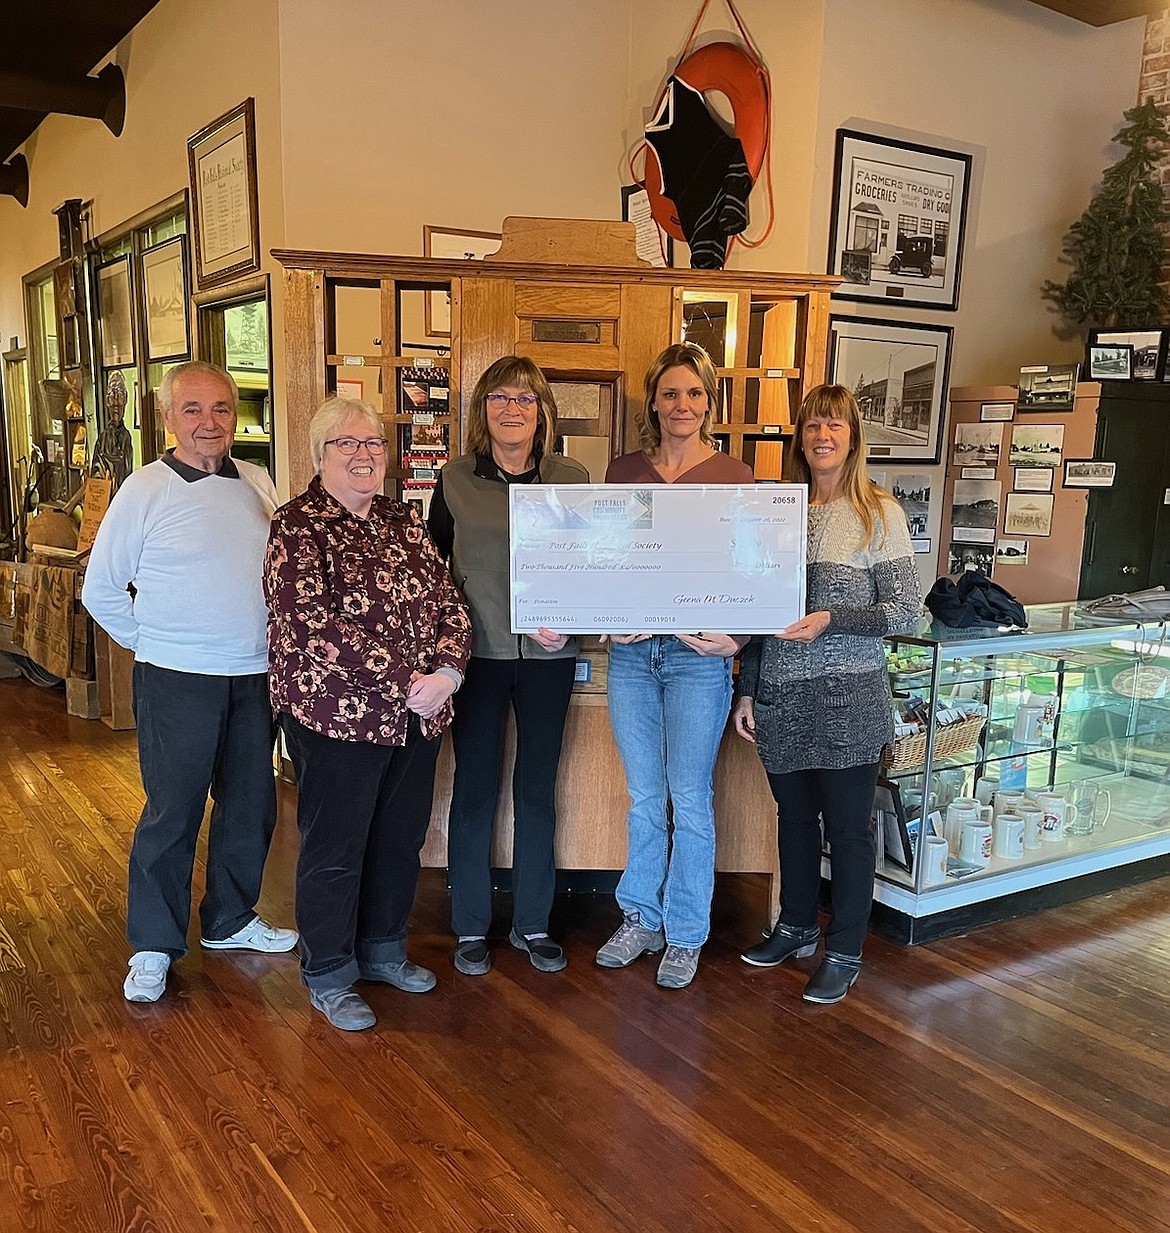 The Post Falls Community Volunteers donated $2,500 to the Post Falls Historical Society as part of more than $10,000 they gifted to other causes in the area. From left: Ted Fredekind (emeritus), Cindy Mead and Kim Brown of the society; and Post Falls Community Volunteers Geena Duczek and Lisa Houston.